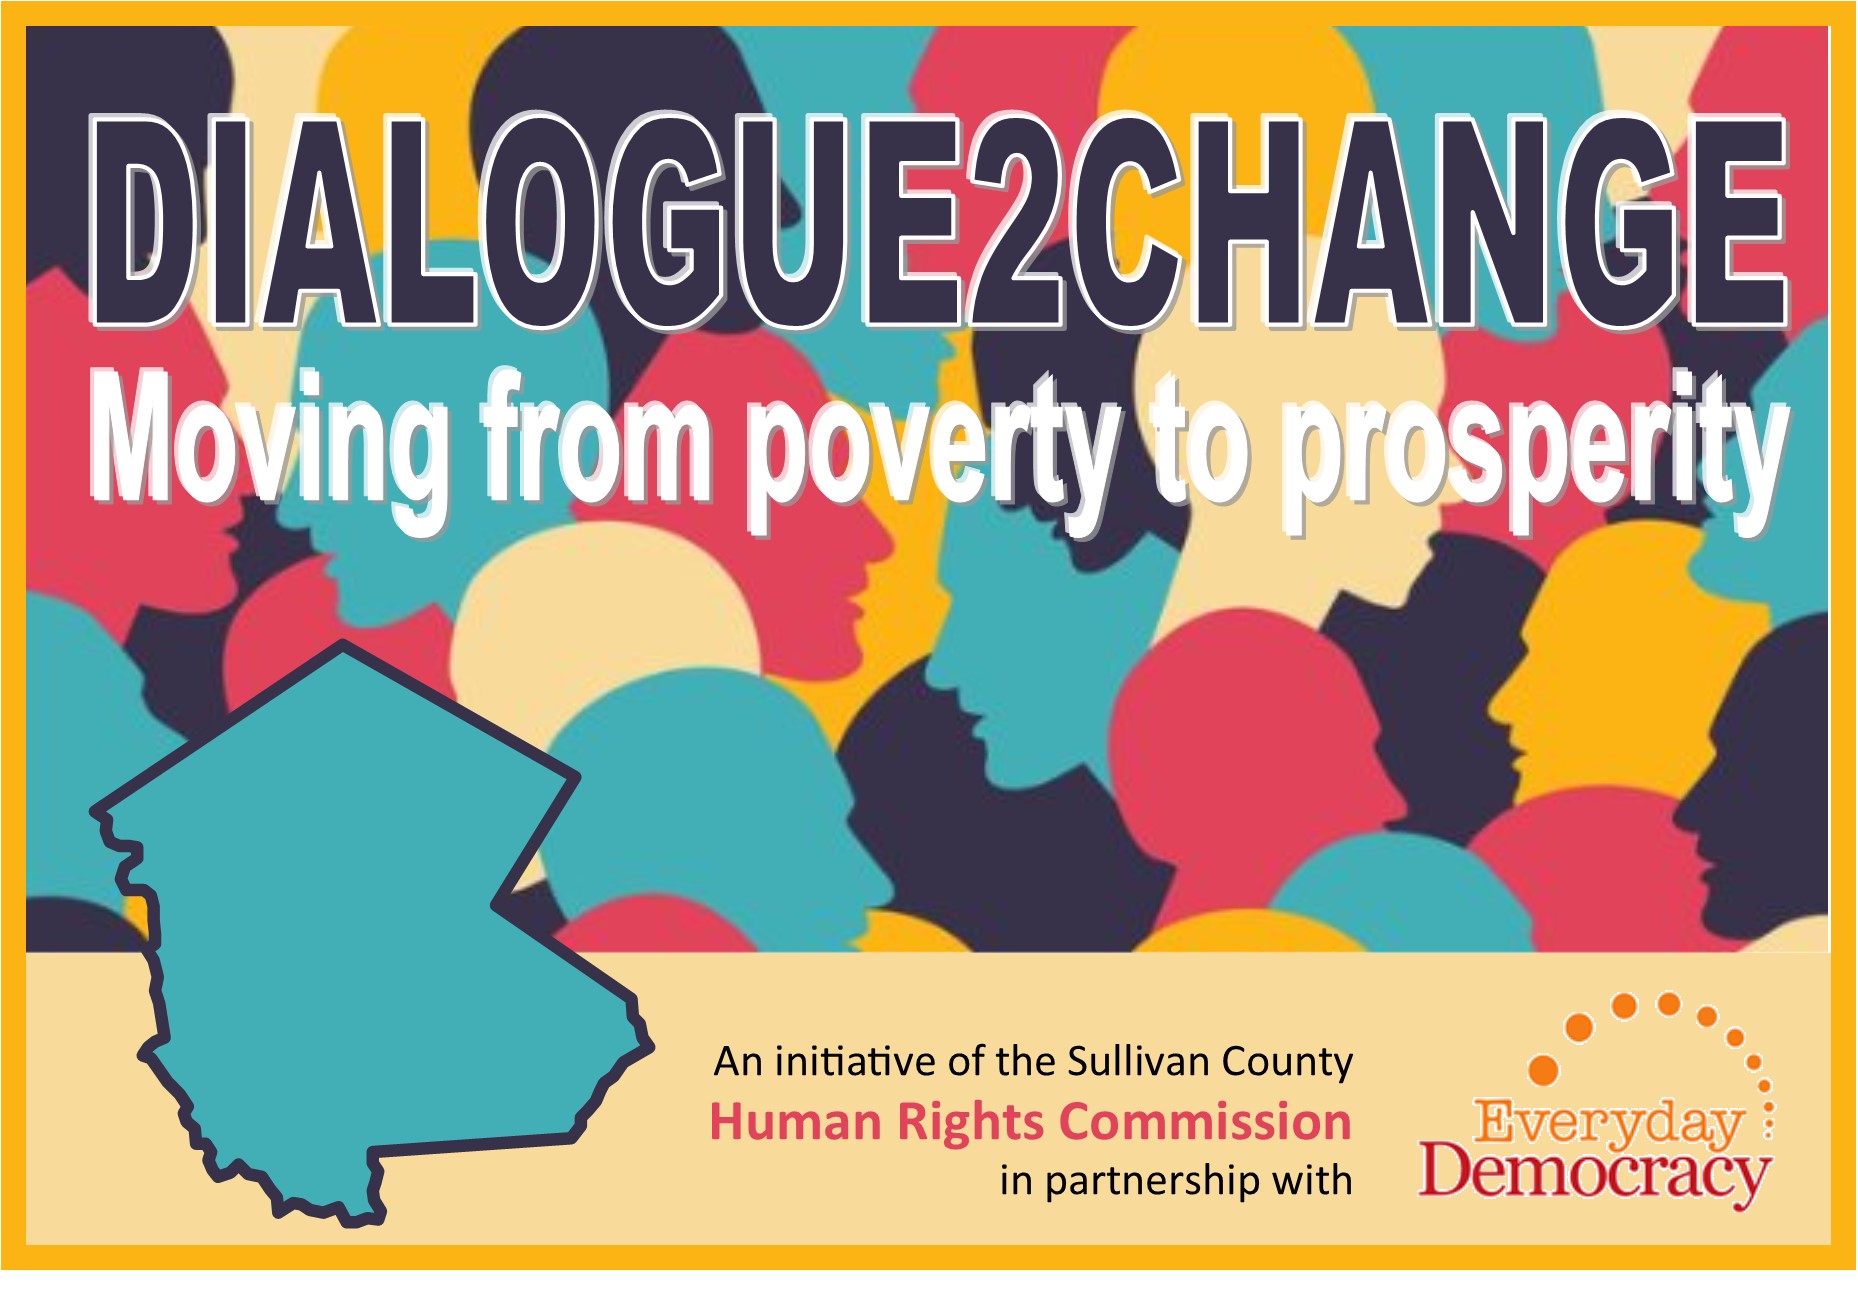 Dialogue 2 Change - Moving from poverty to prosperity